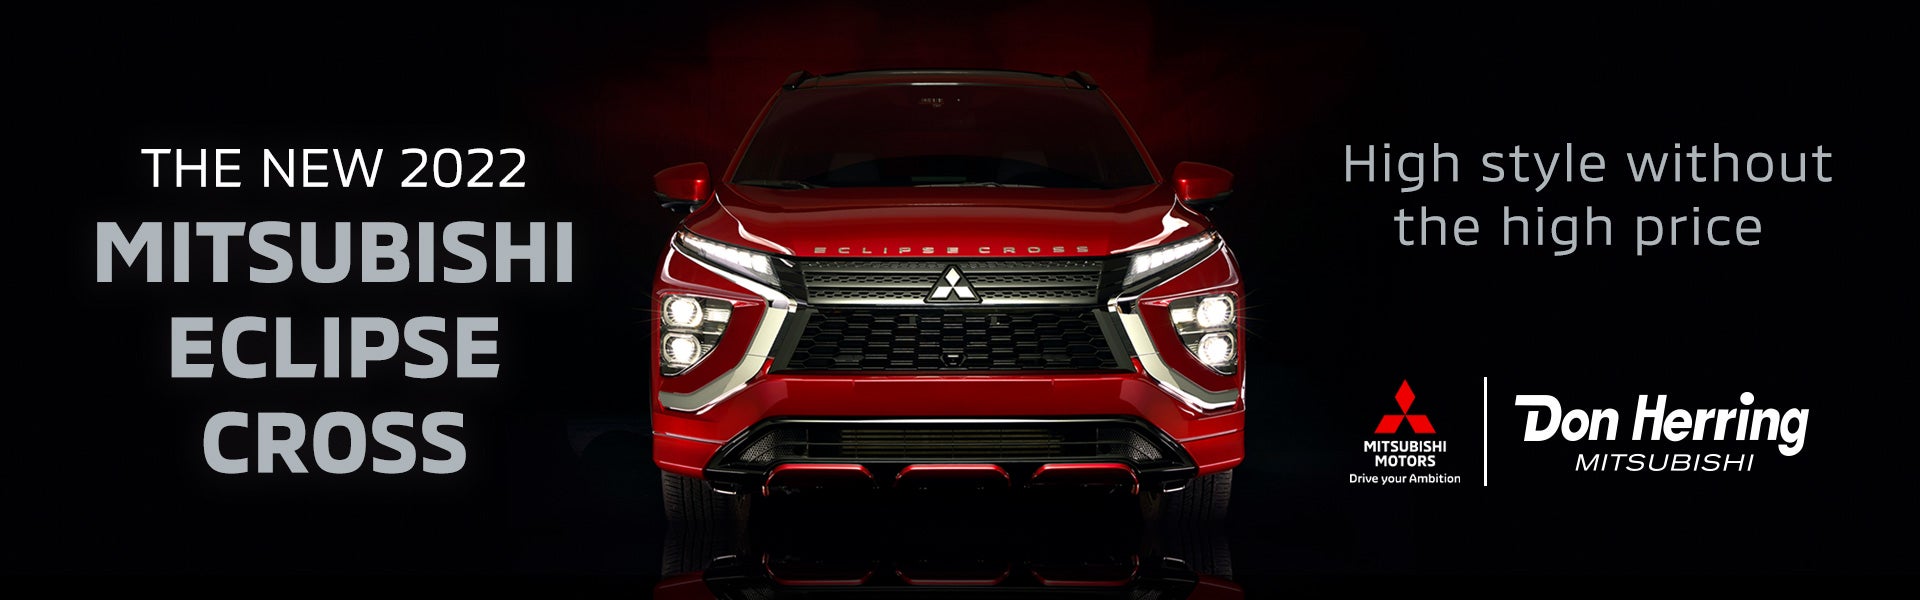 The New 2022 Eclipse Cross